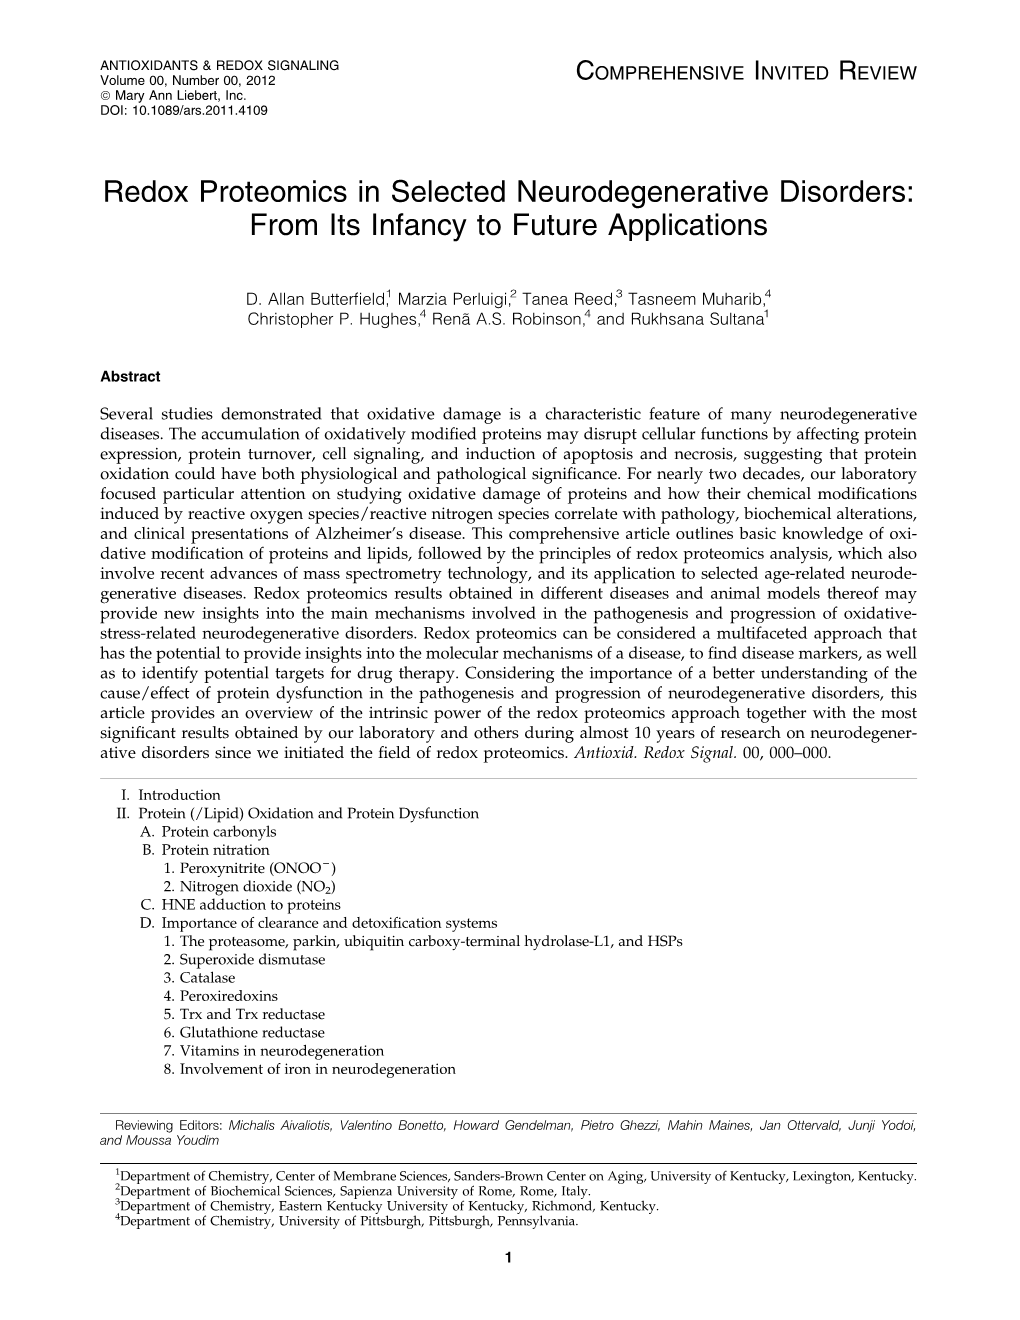 Redox Proteomics in Selected Neurodegenerative Disorders: from Its Infancy to Future Applications